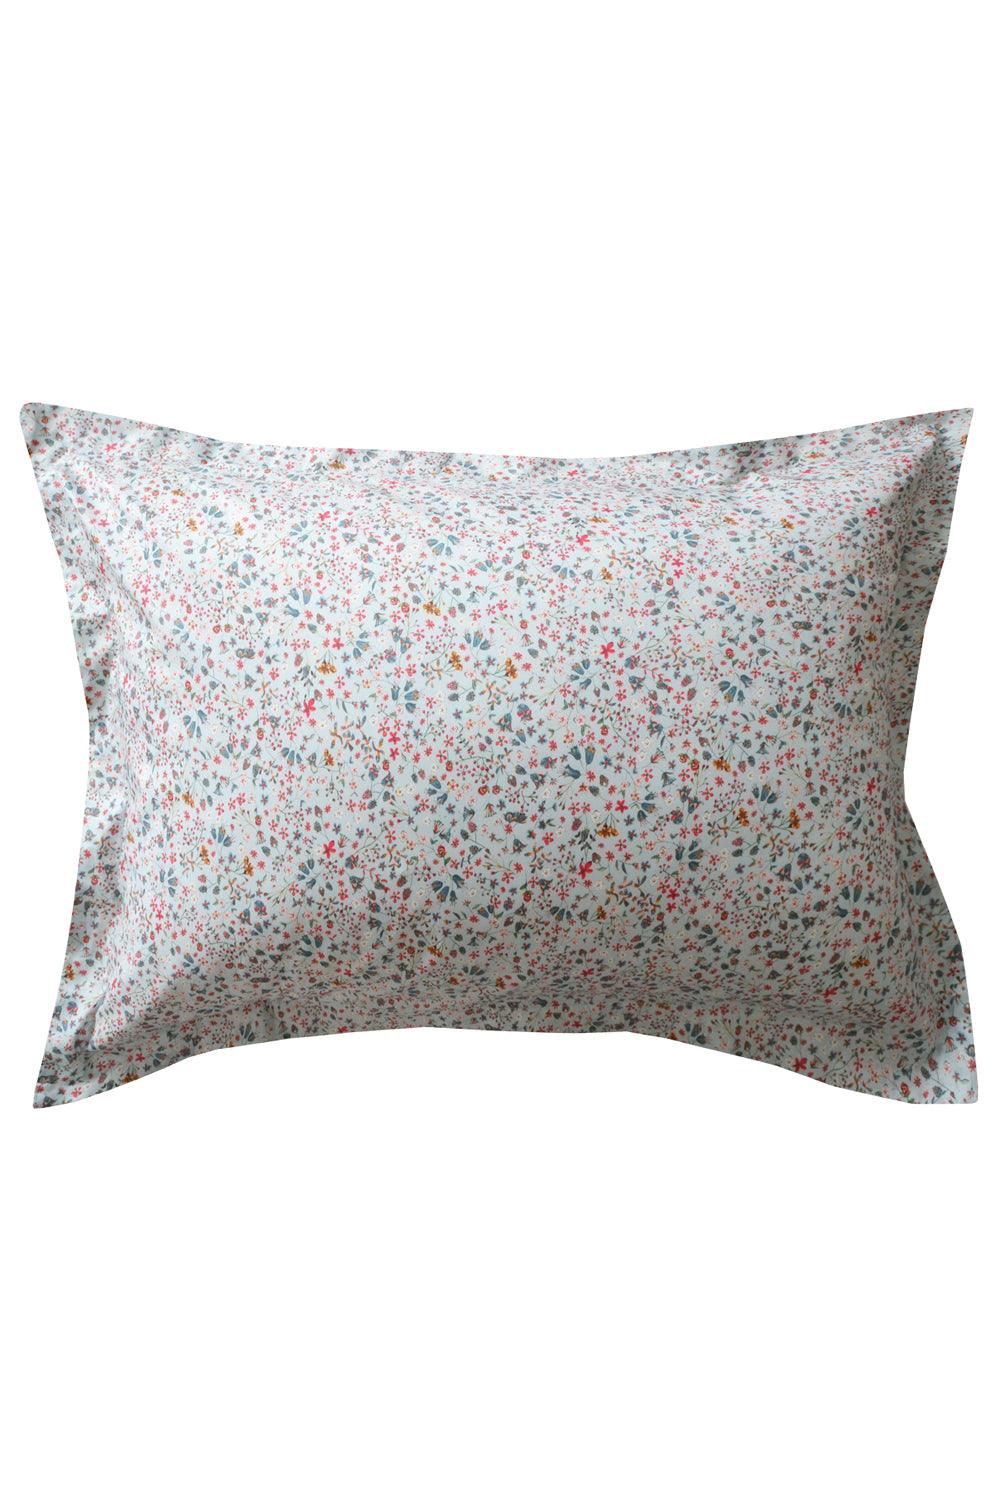 Oxford Pillowcase made with Liberty Fabric DONNA LEIGH SILVER - Coco & Wolf